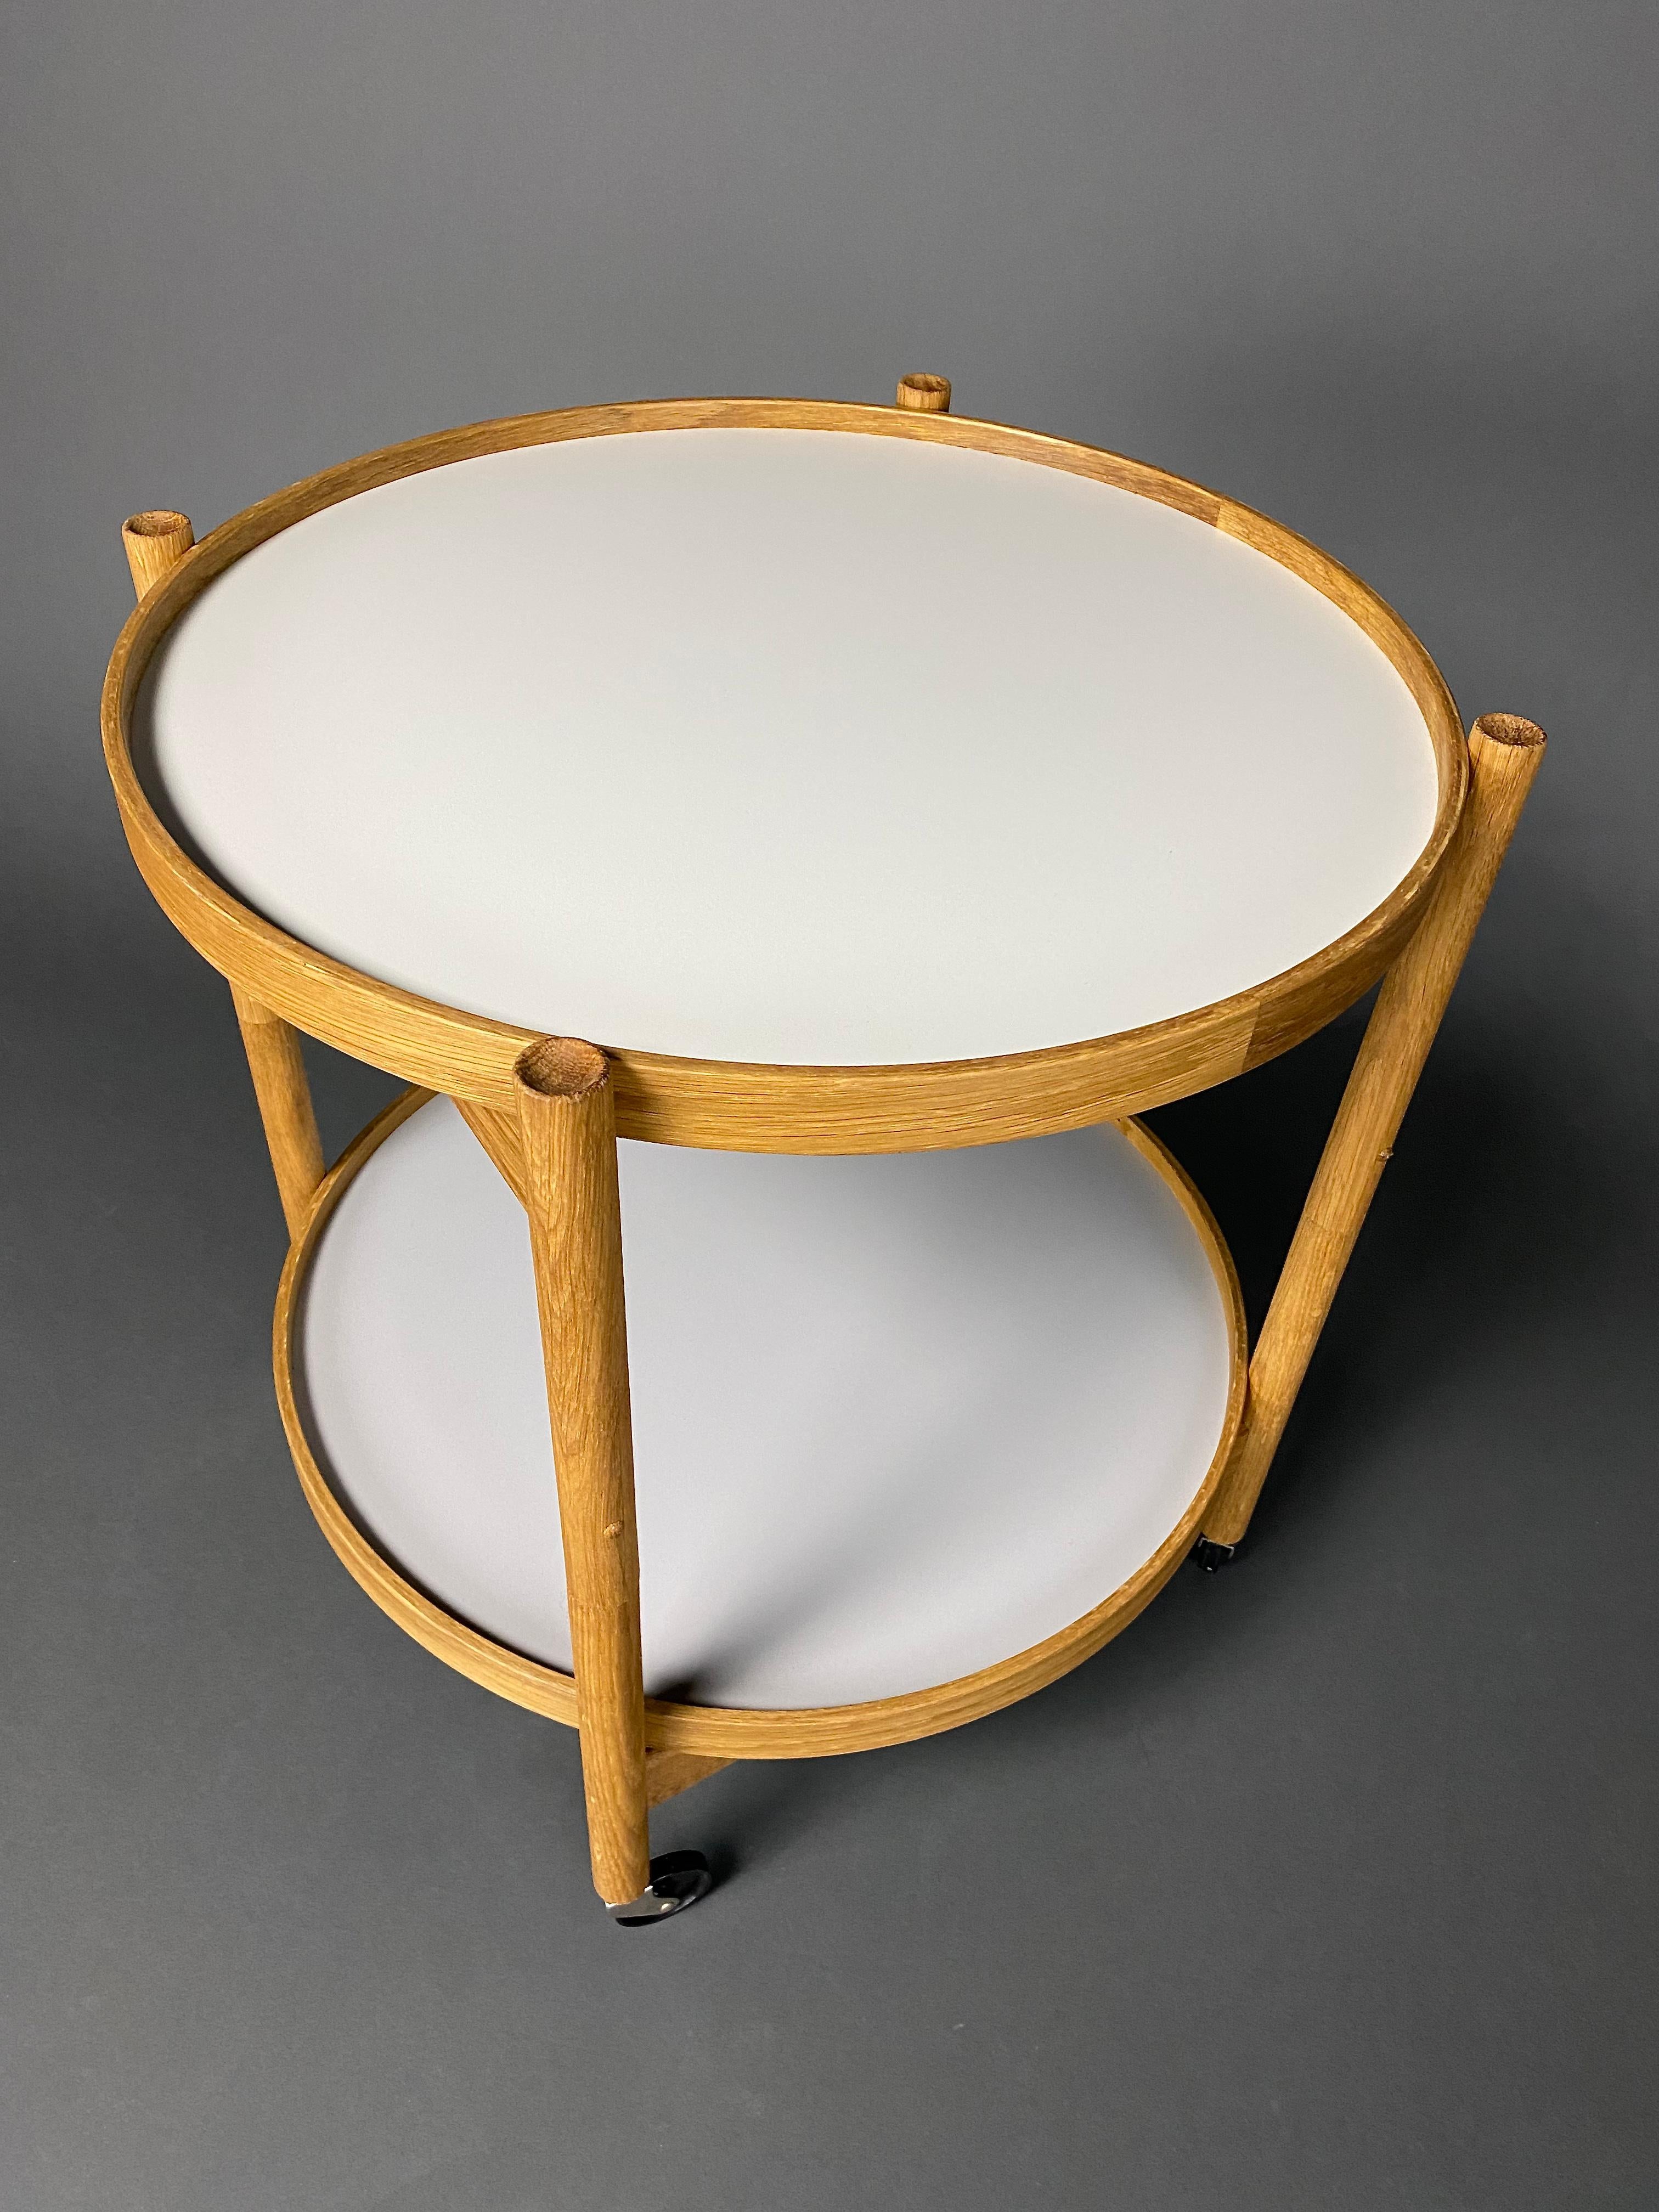 Danish Mid-Century Modern Foldable Serving Trolley For Sale 2